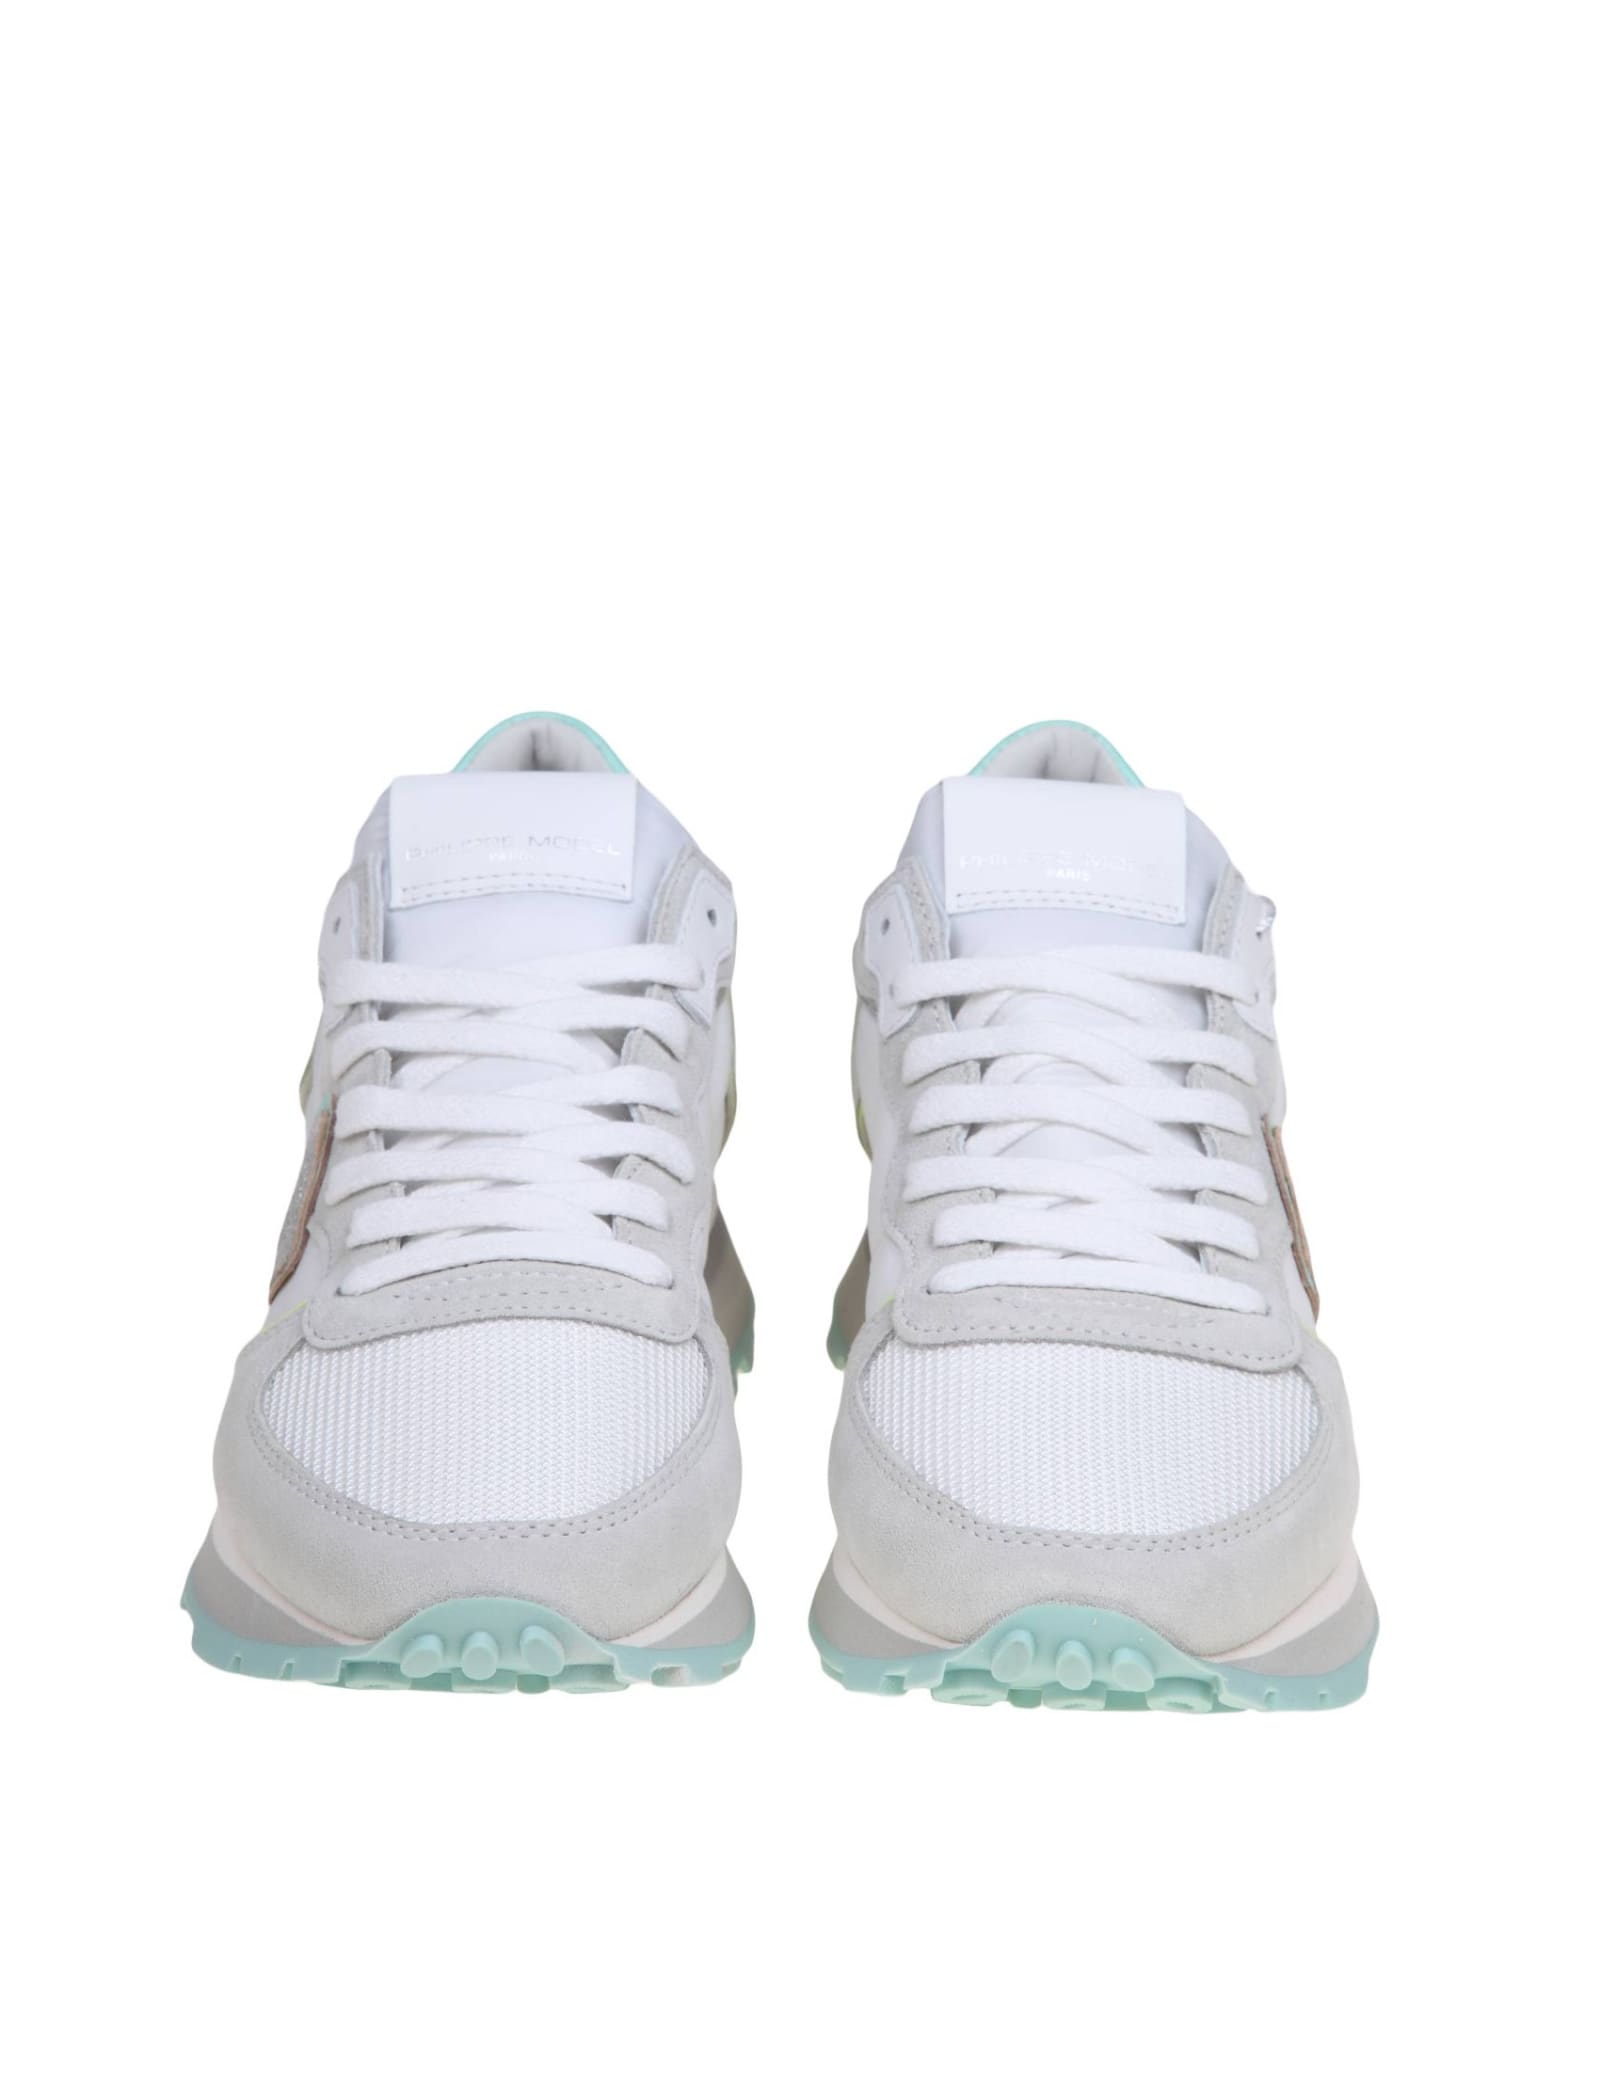 Shop Philipp Plein Philippe Model Tropez Sneakers In Suede And Nylon Color White And Turquoise